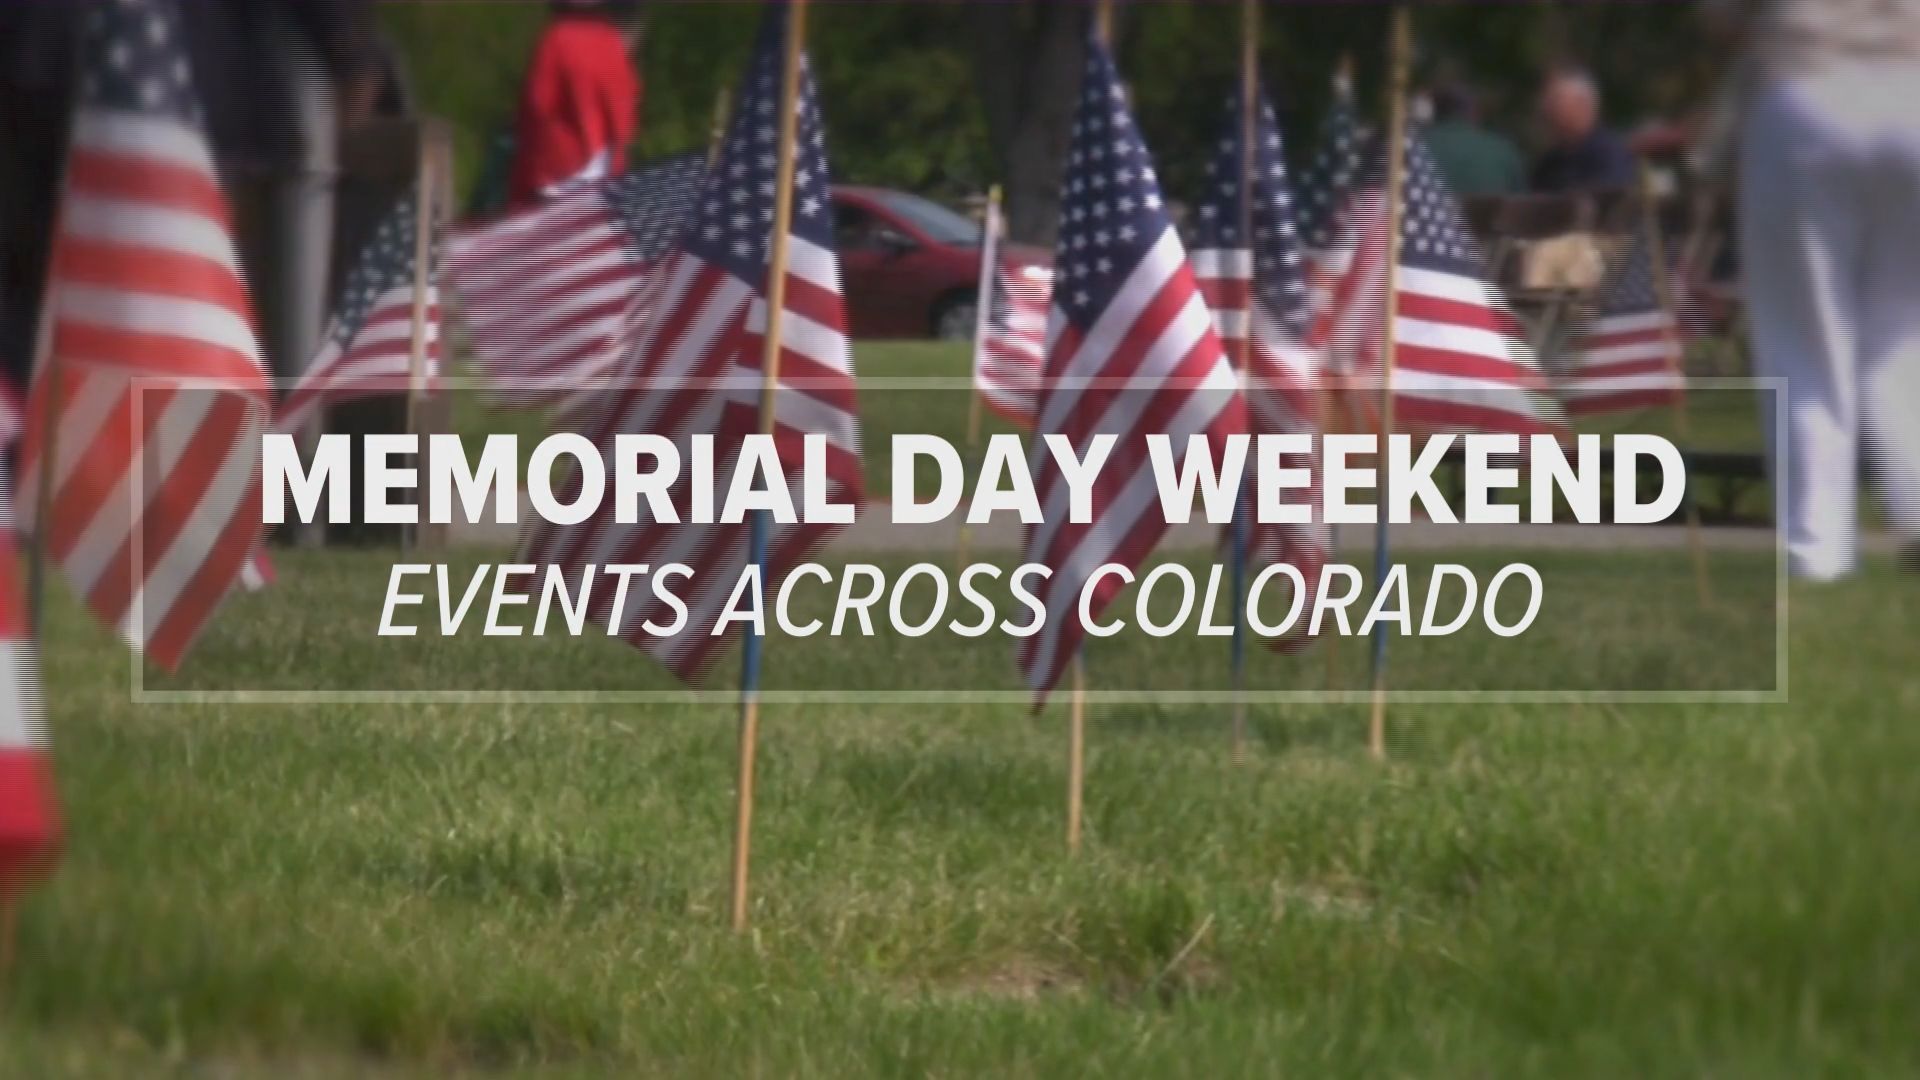 Coloradans will honor those who have died in the service of our country with parades, ceremonies and remembrances across the state this Memorial Day weekend.